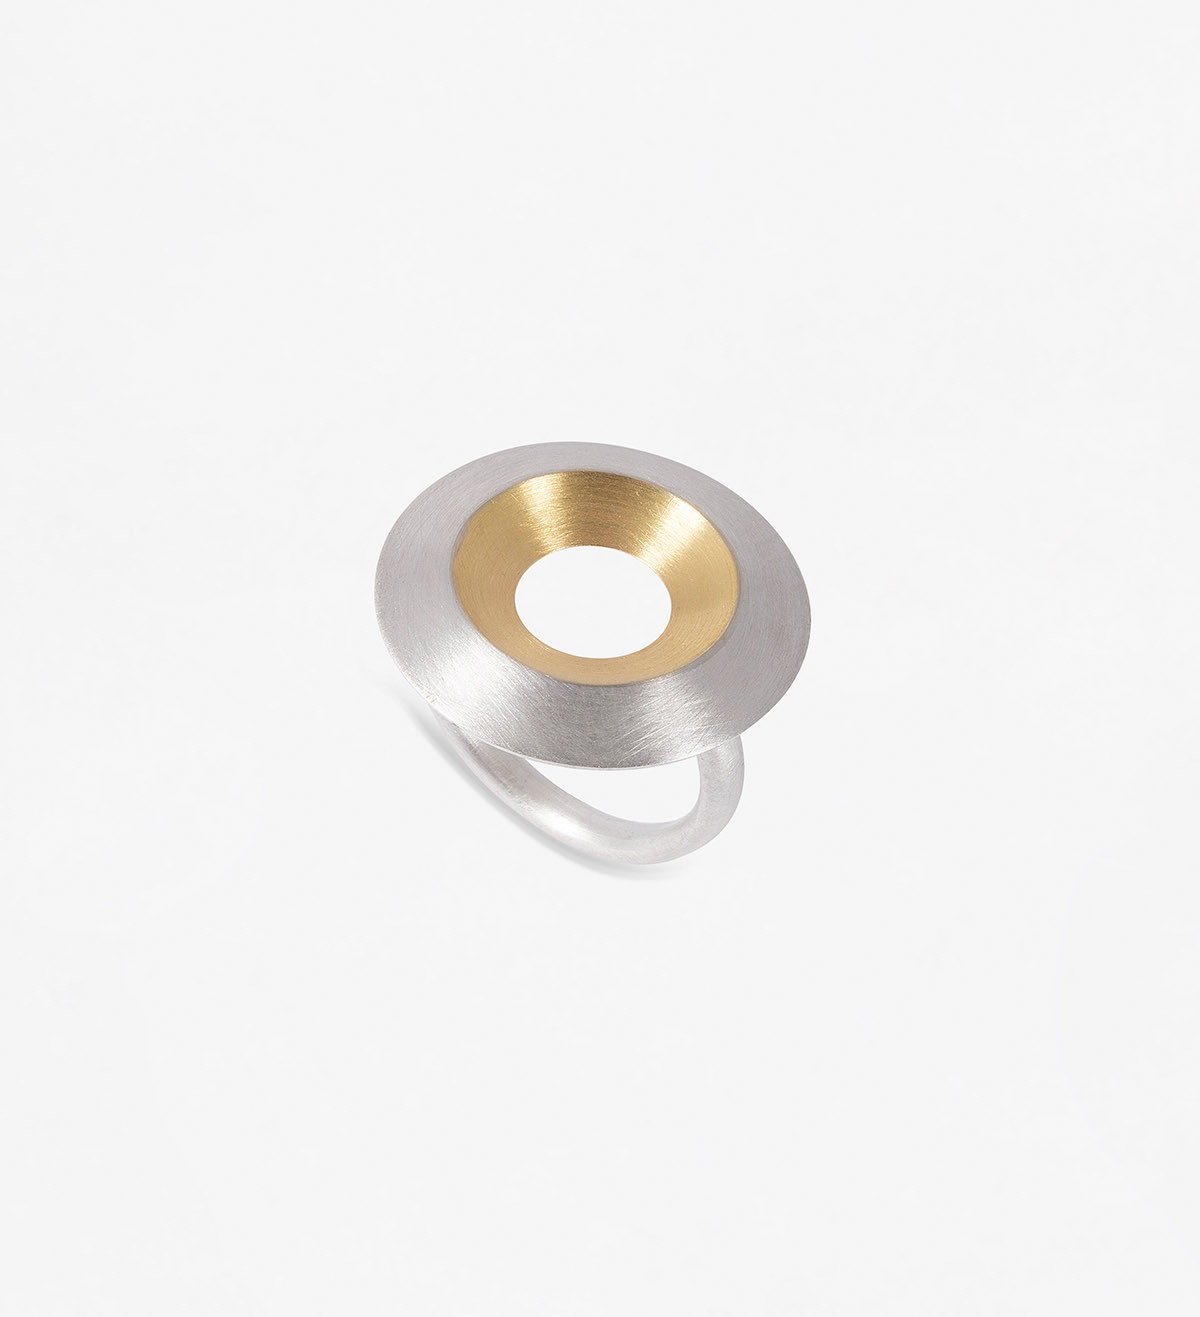 18k gold and silver Ronda ring 25mm